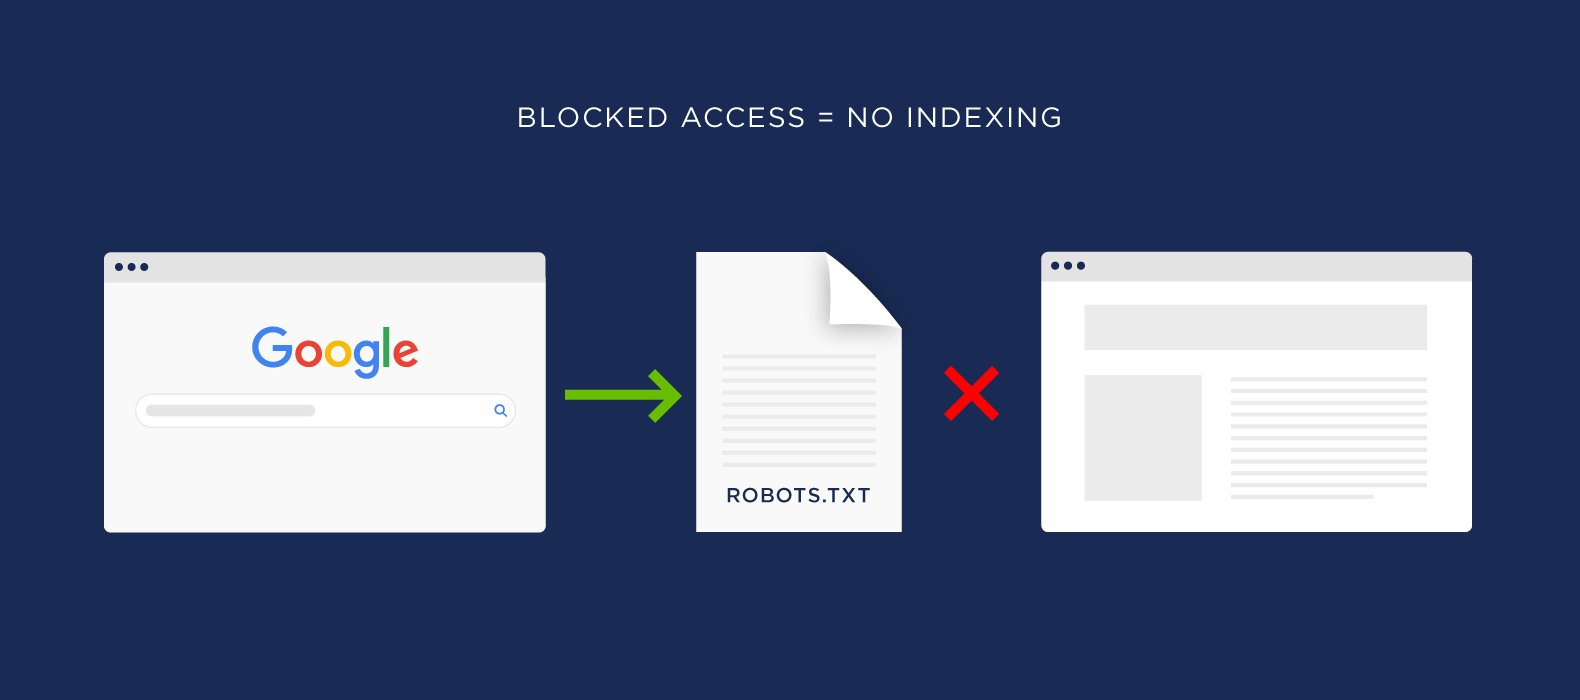 Blocked access means no indexing